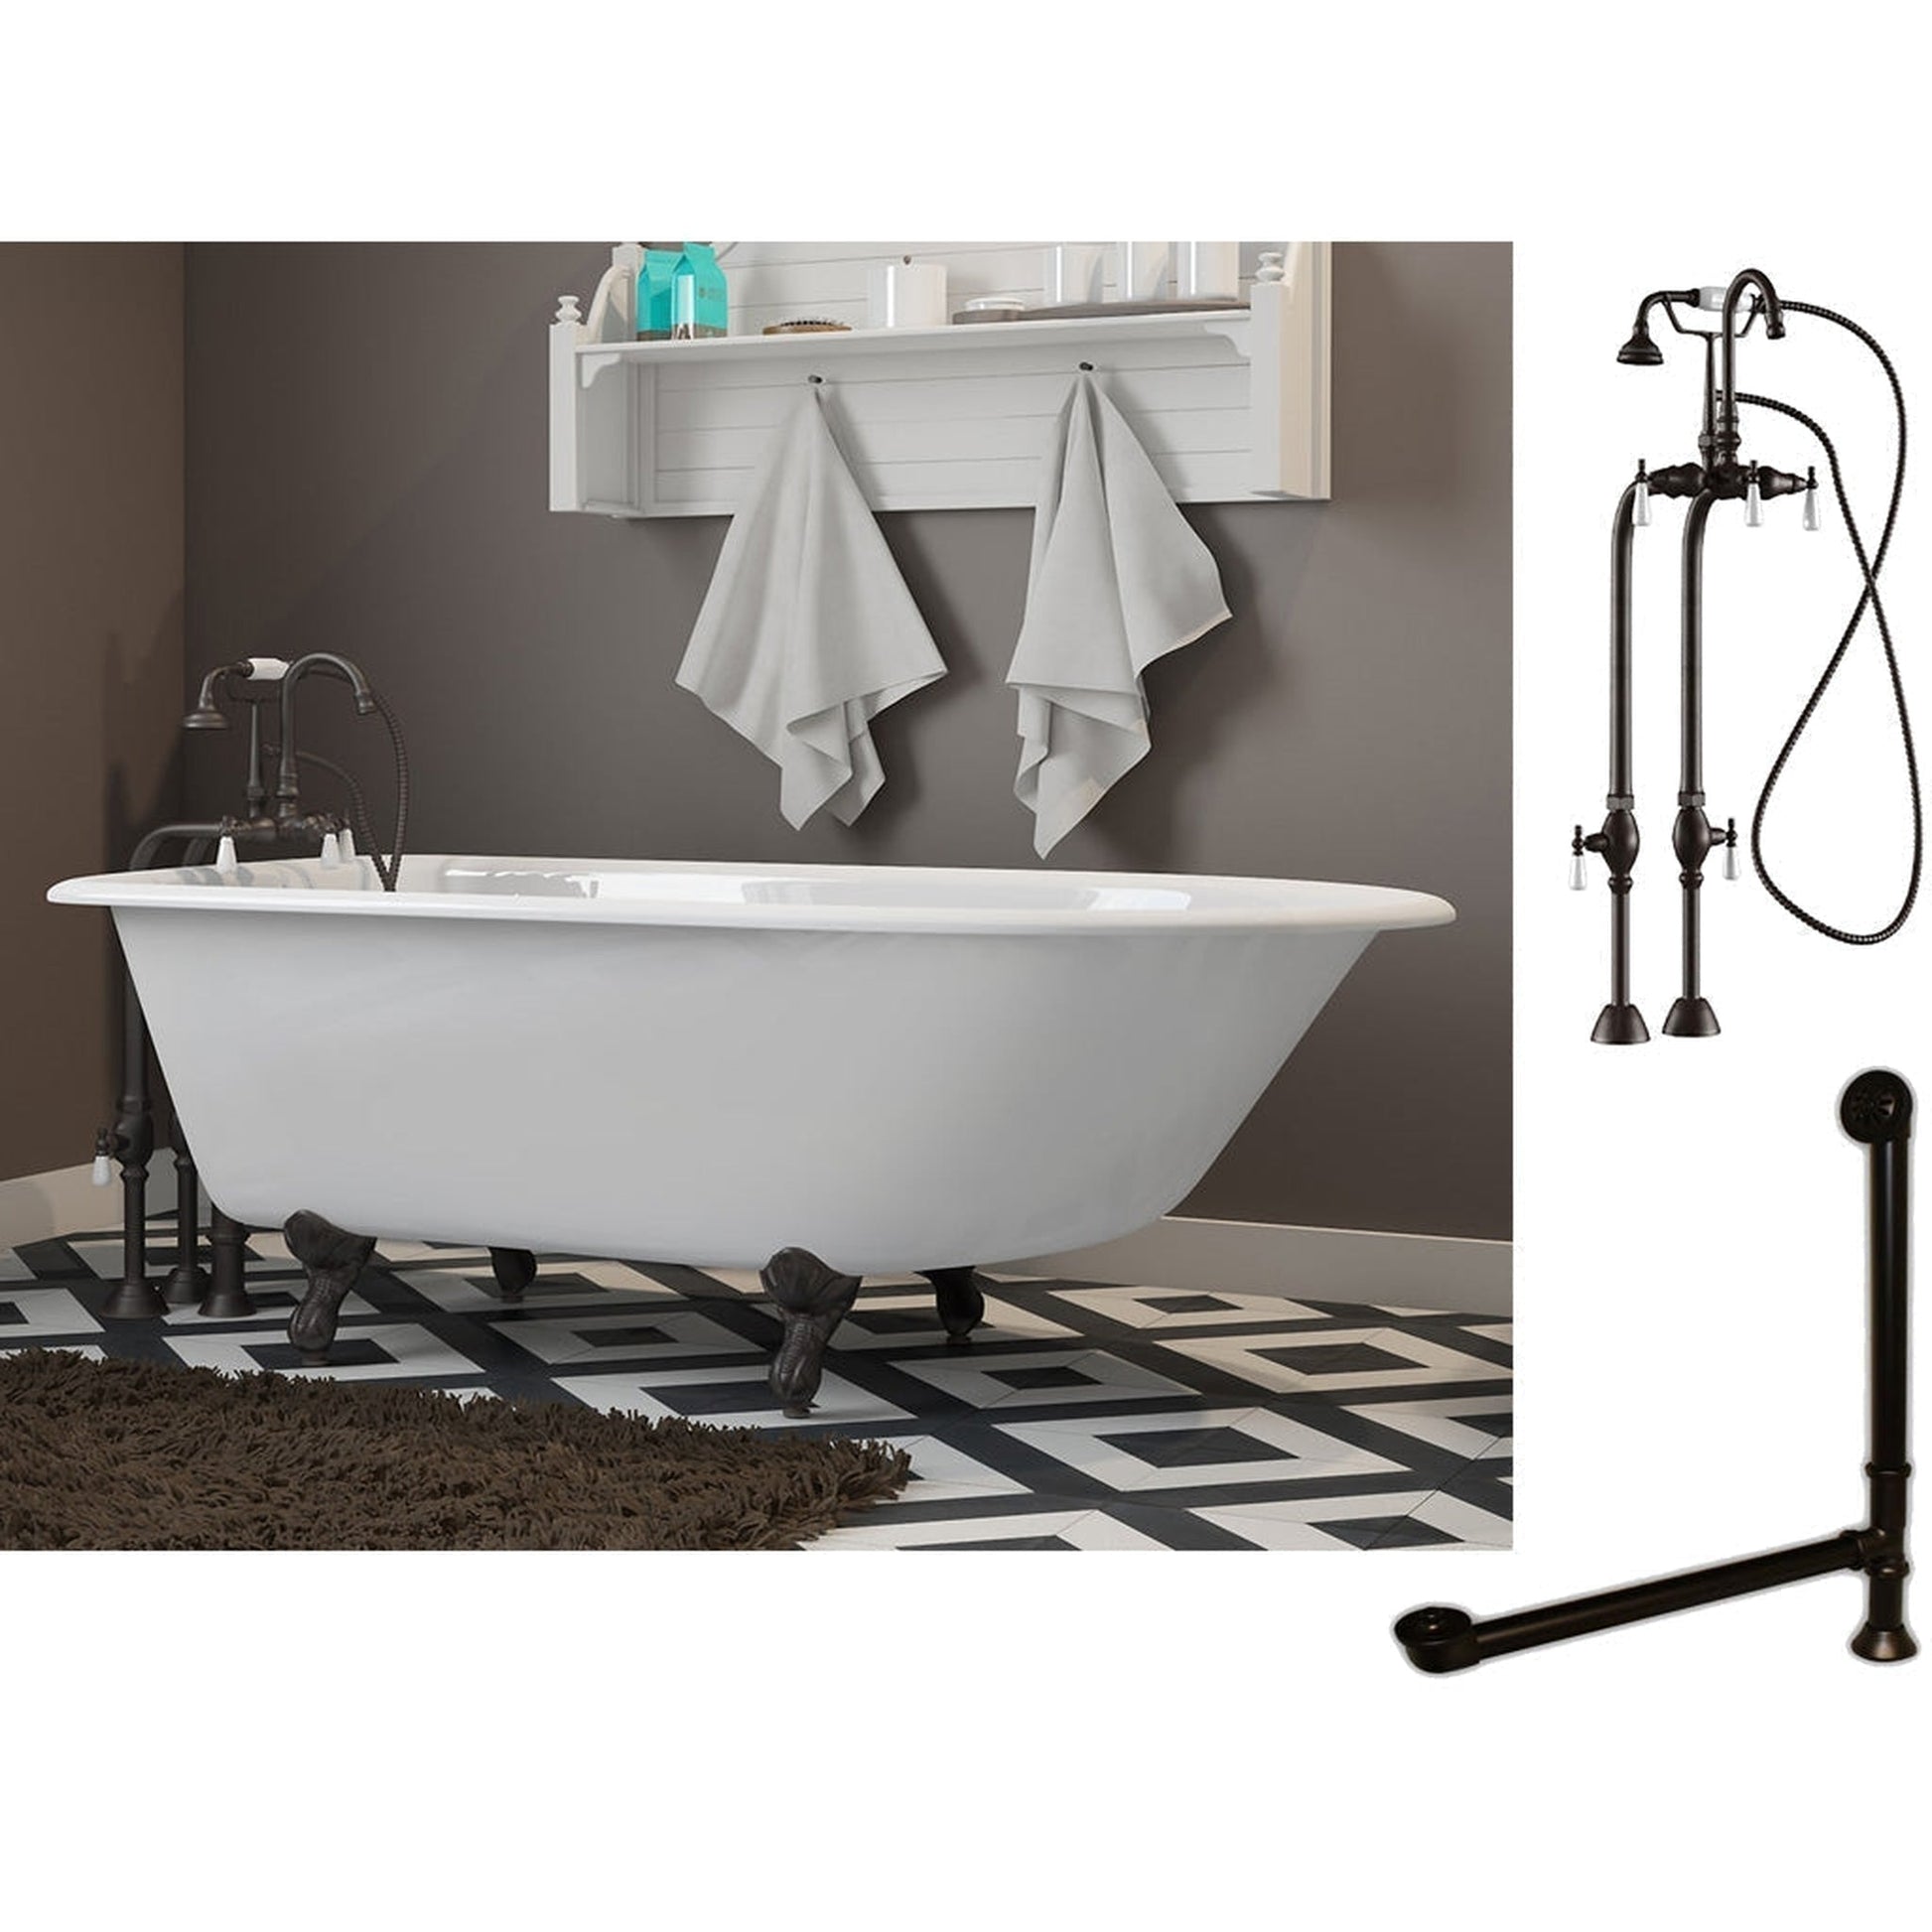 Cambridge Plumbing 54" White Cast Iron Rolled Rim Clawfoot Bathtub With No Deck Holes And Complete Plumbing Package Including Freestanding English Telephone Gooseneck Faucet, Drain And Overflow Assembly In Oil Rubbed Bronze